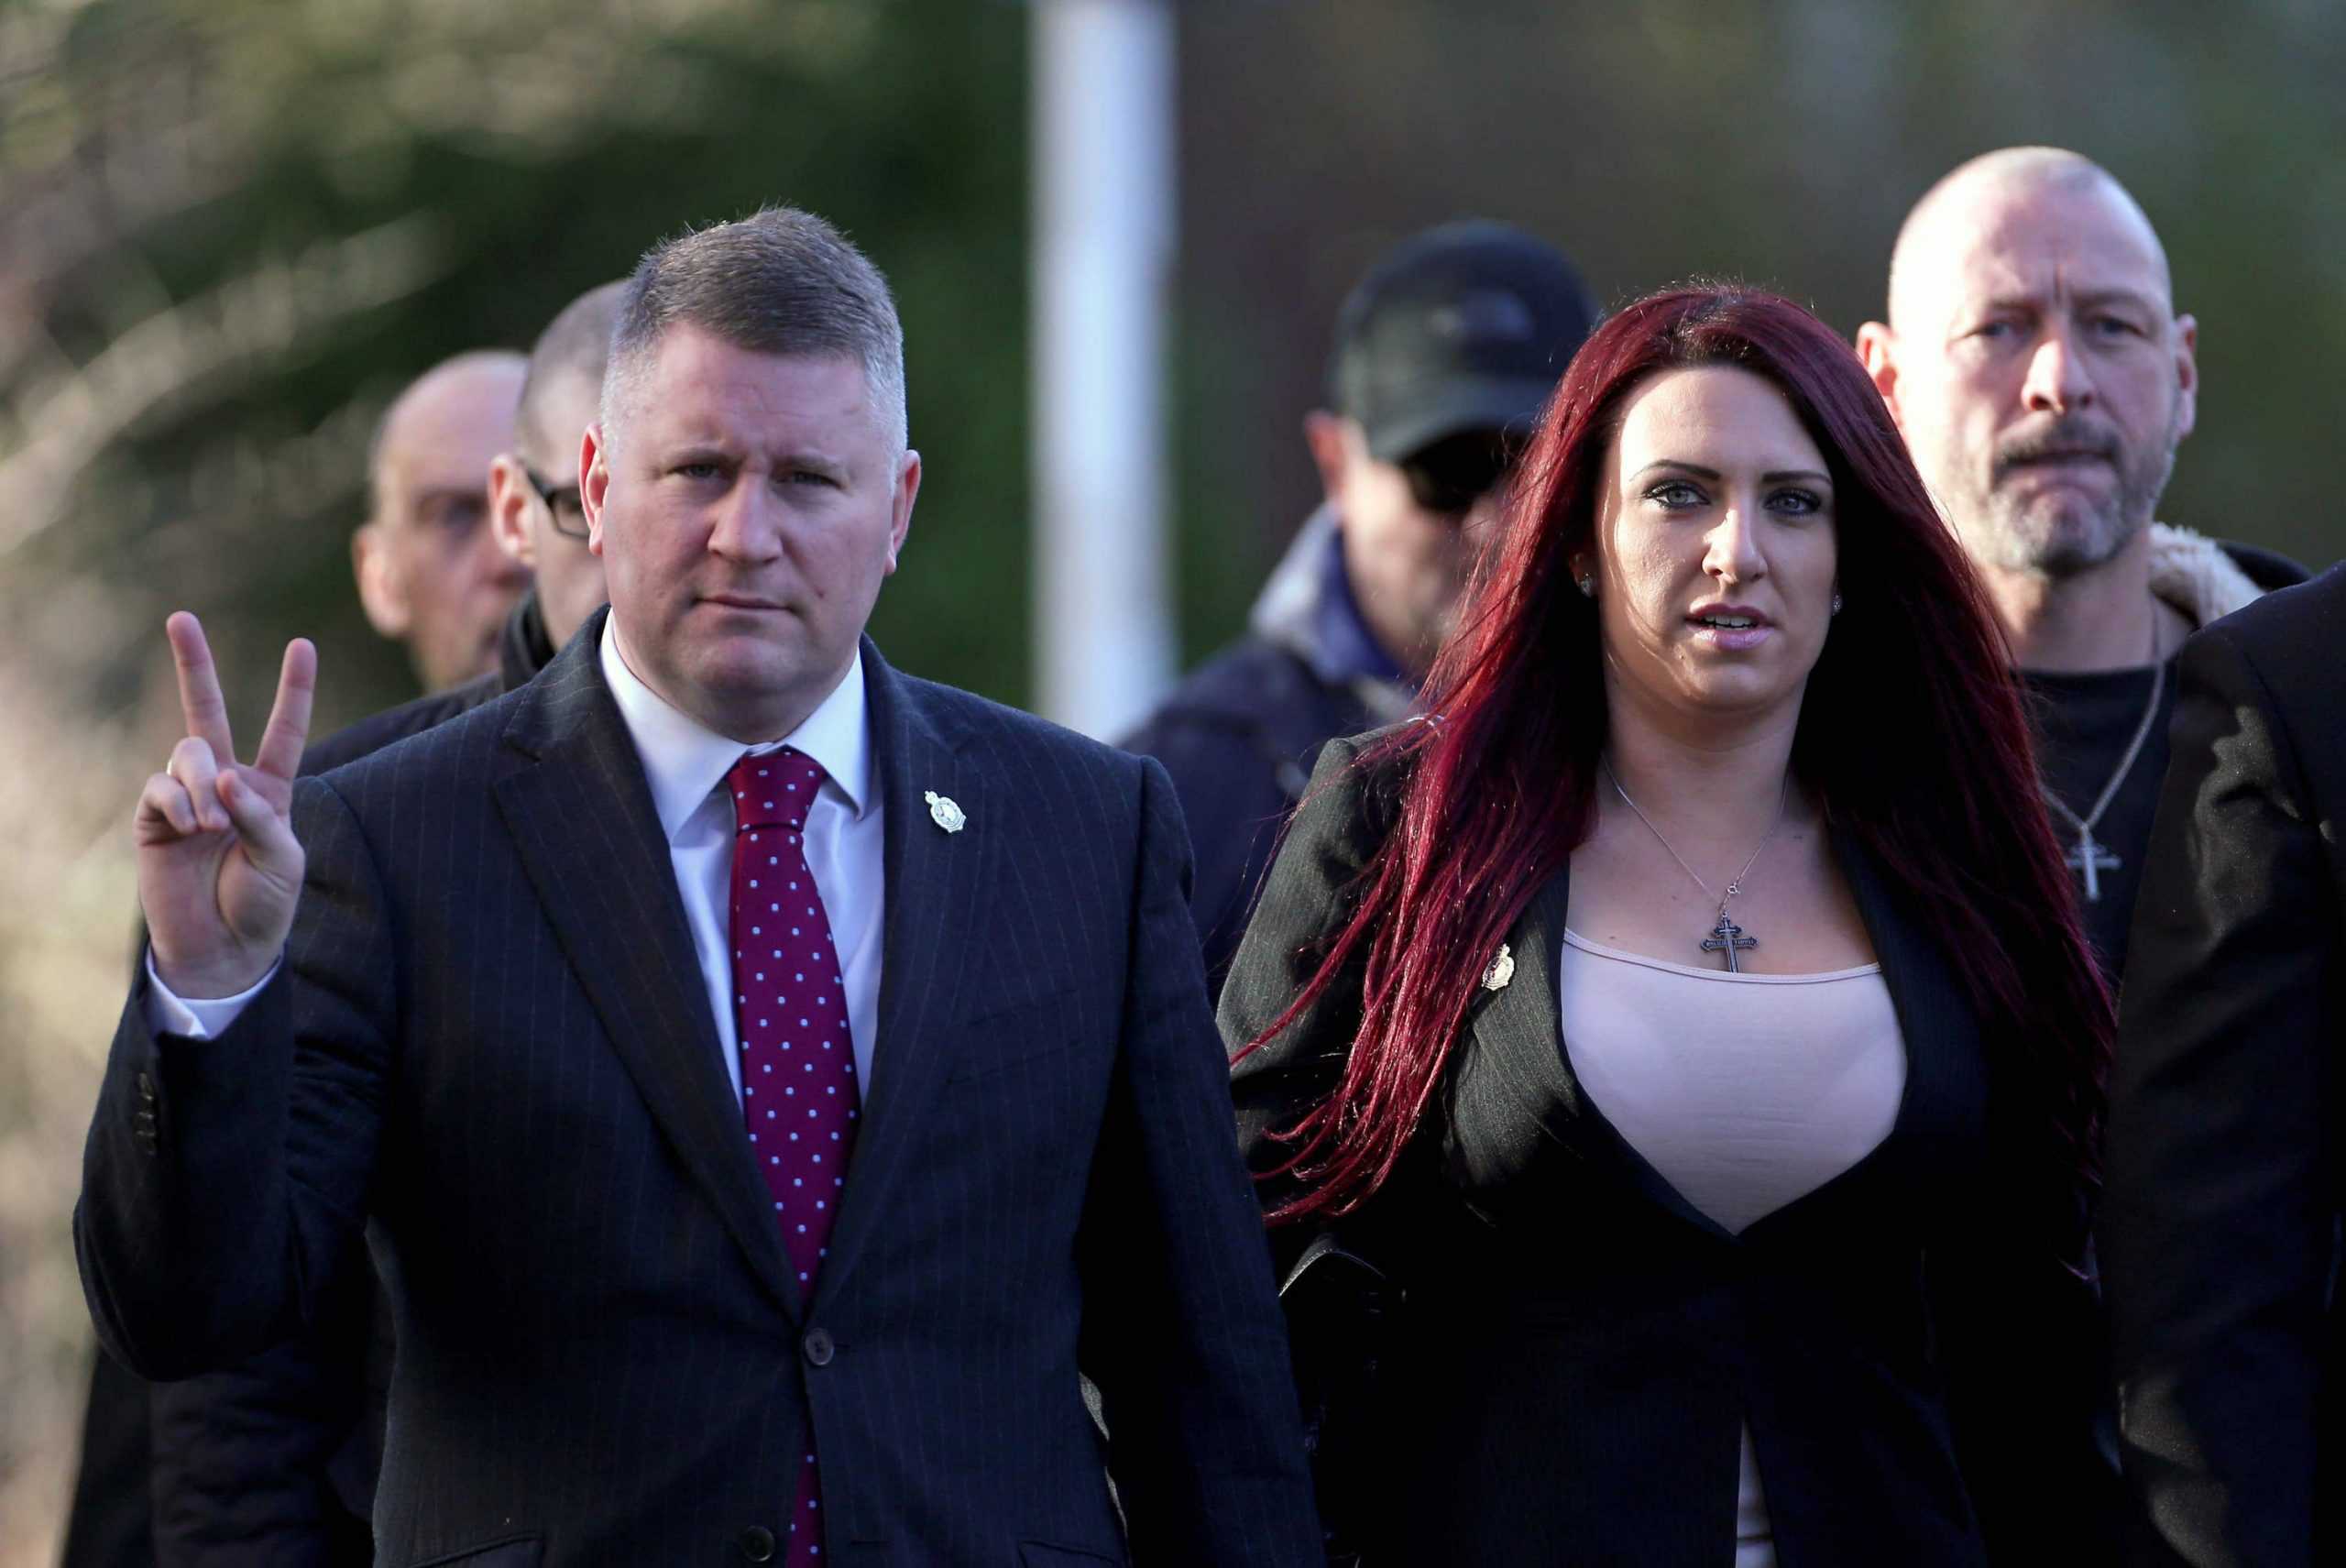 Far-right group Britain First registers as a political party